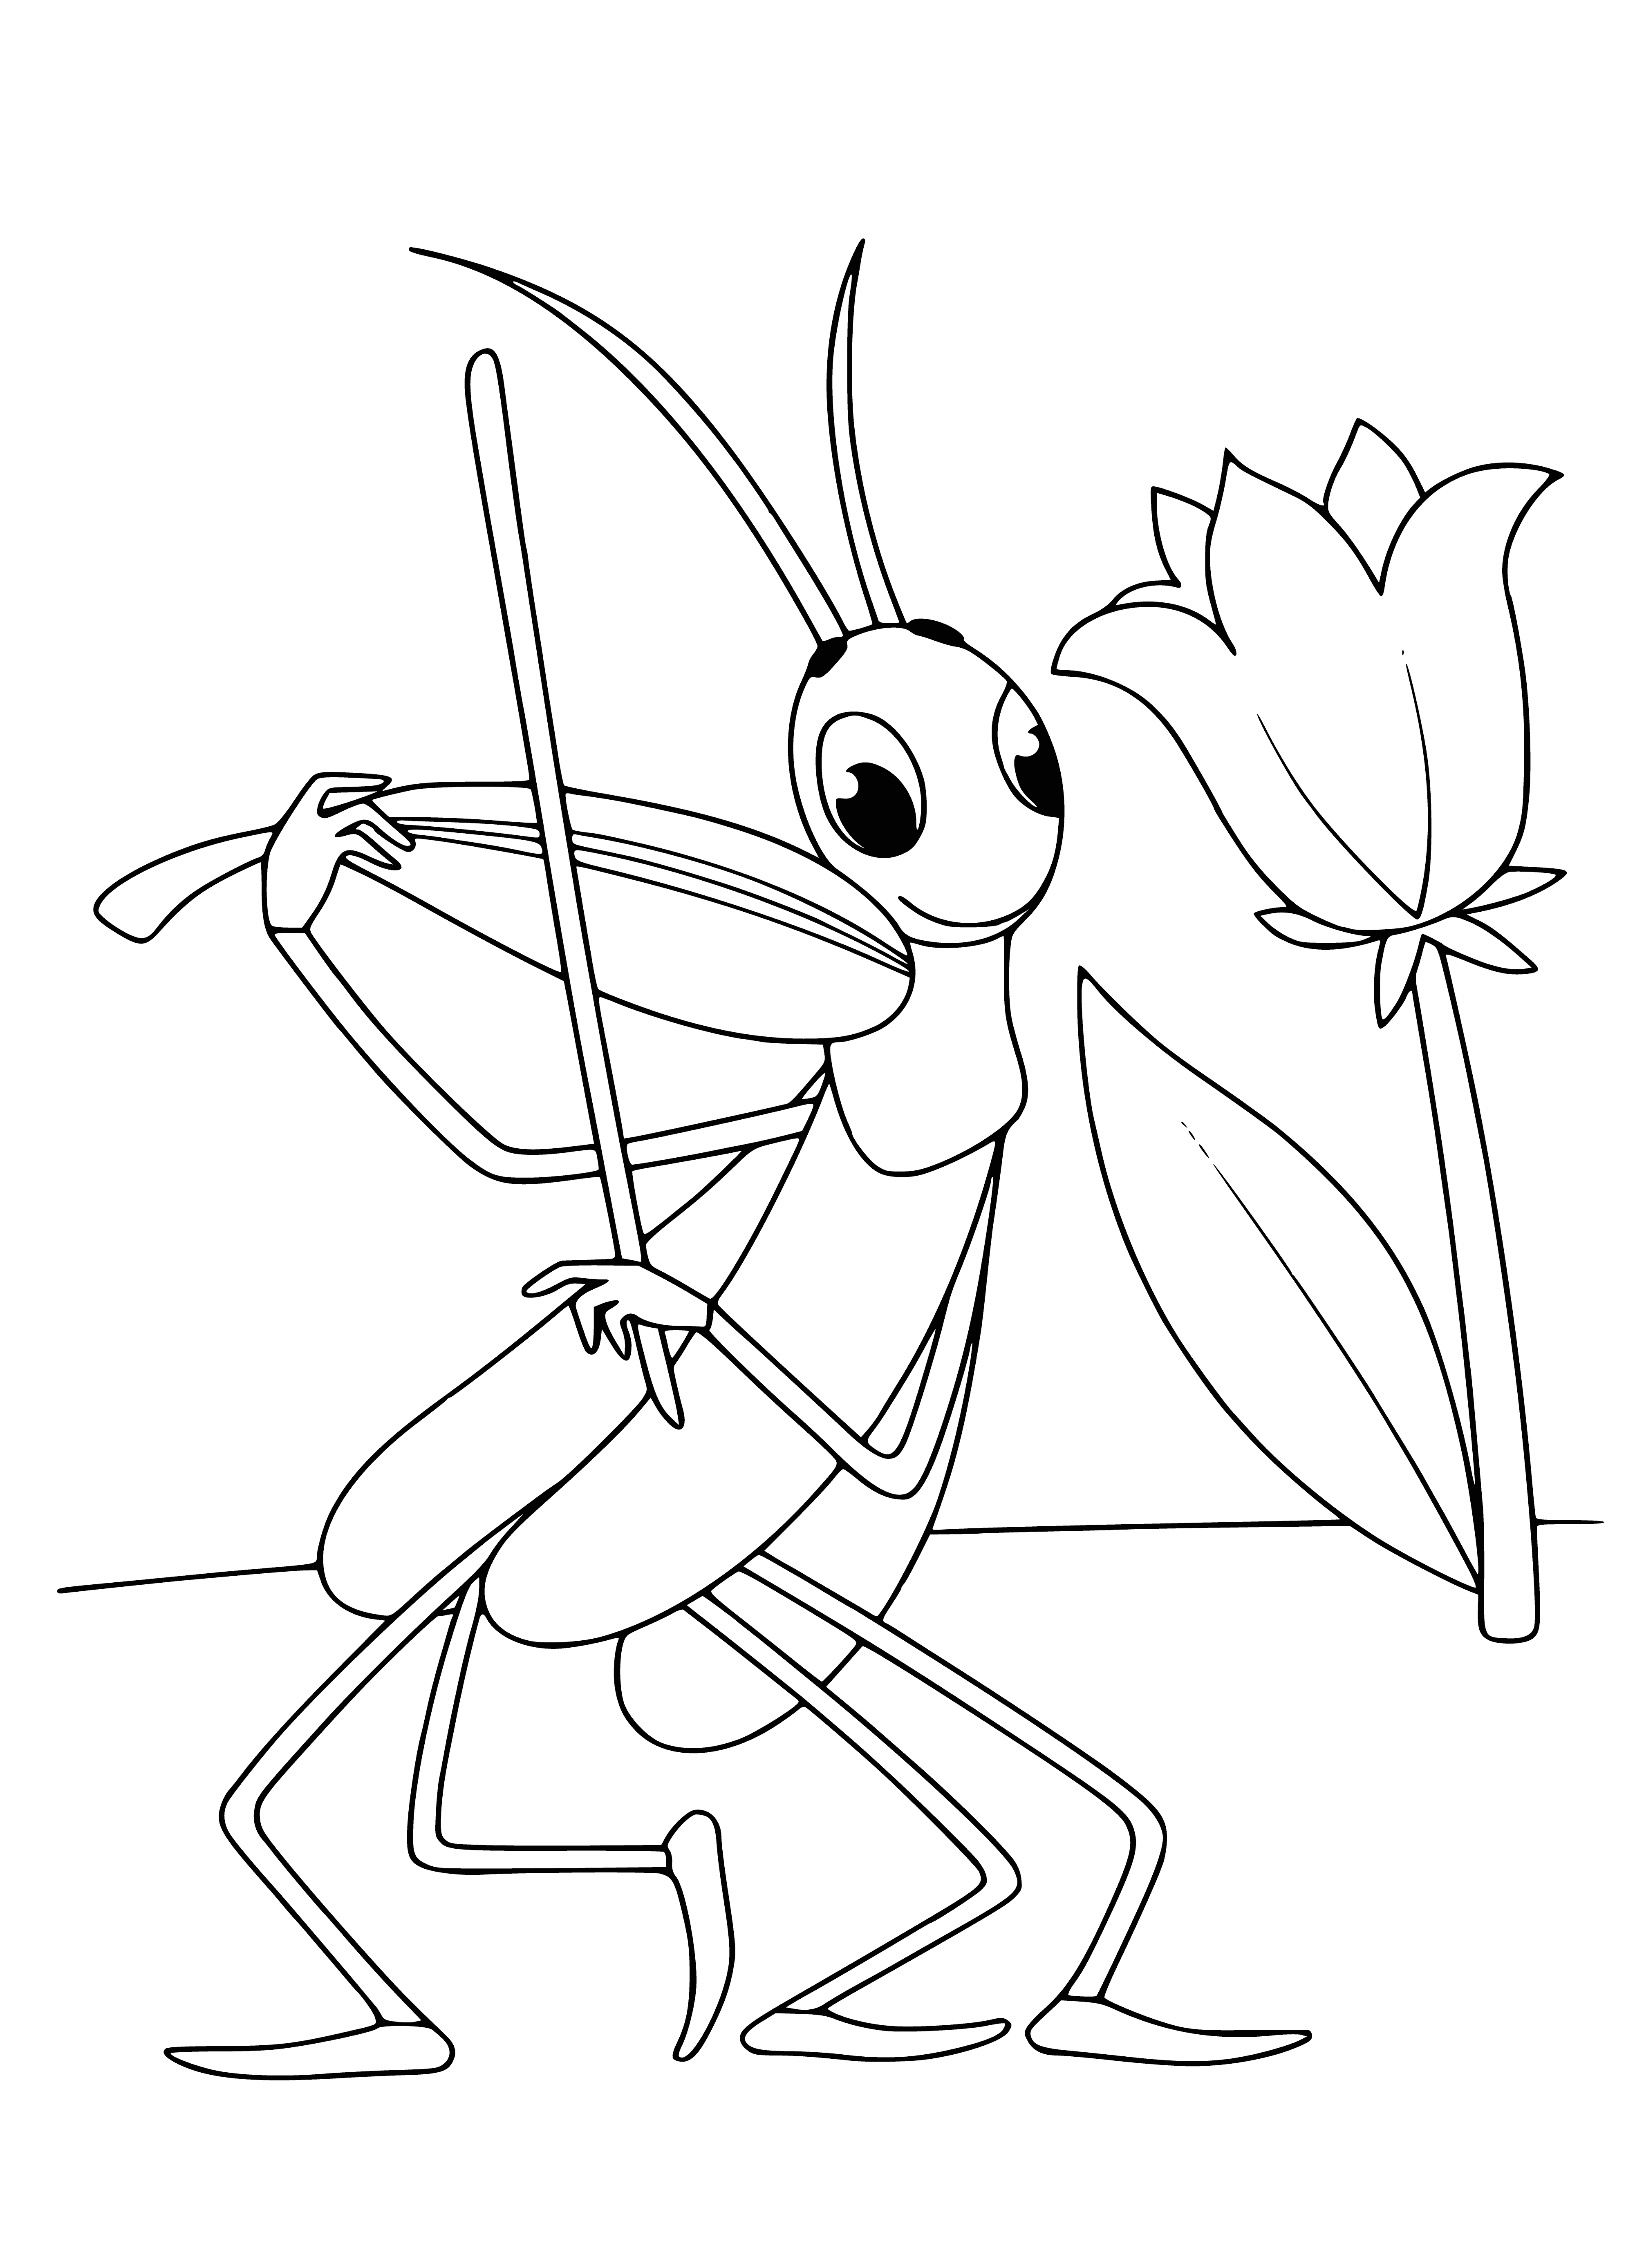 coloring page: Small girl in blue dress dances to the music of a tiny grasshopper playing the violin in a field of tall grass.